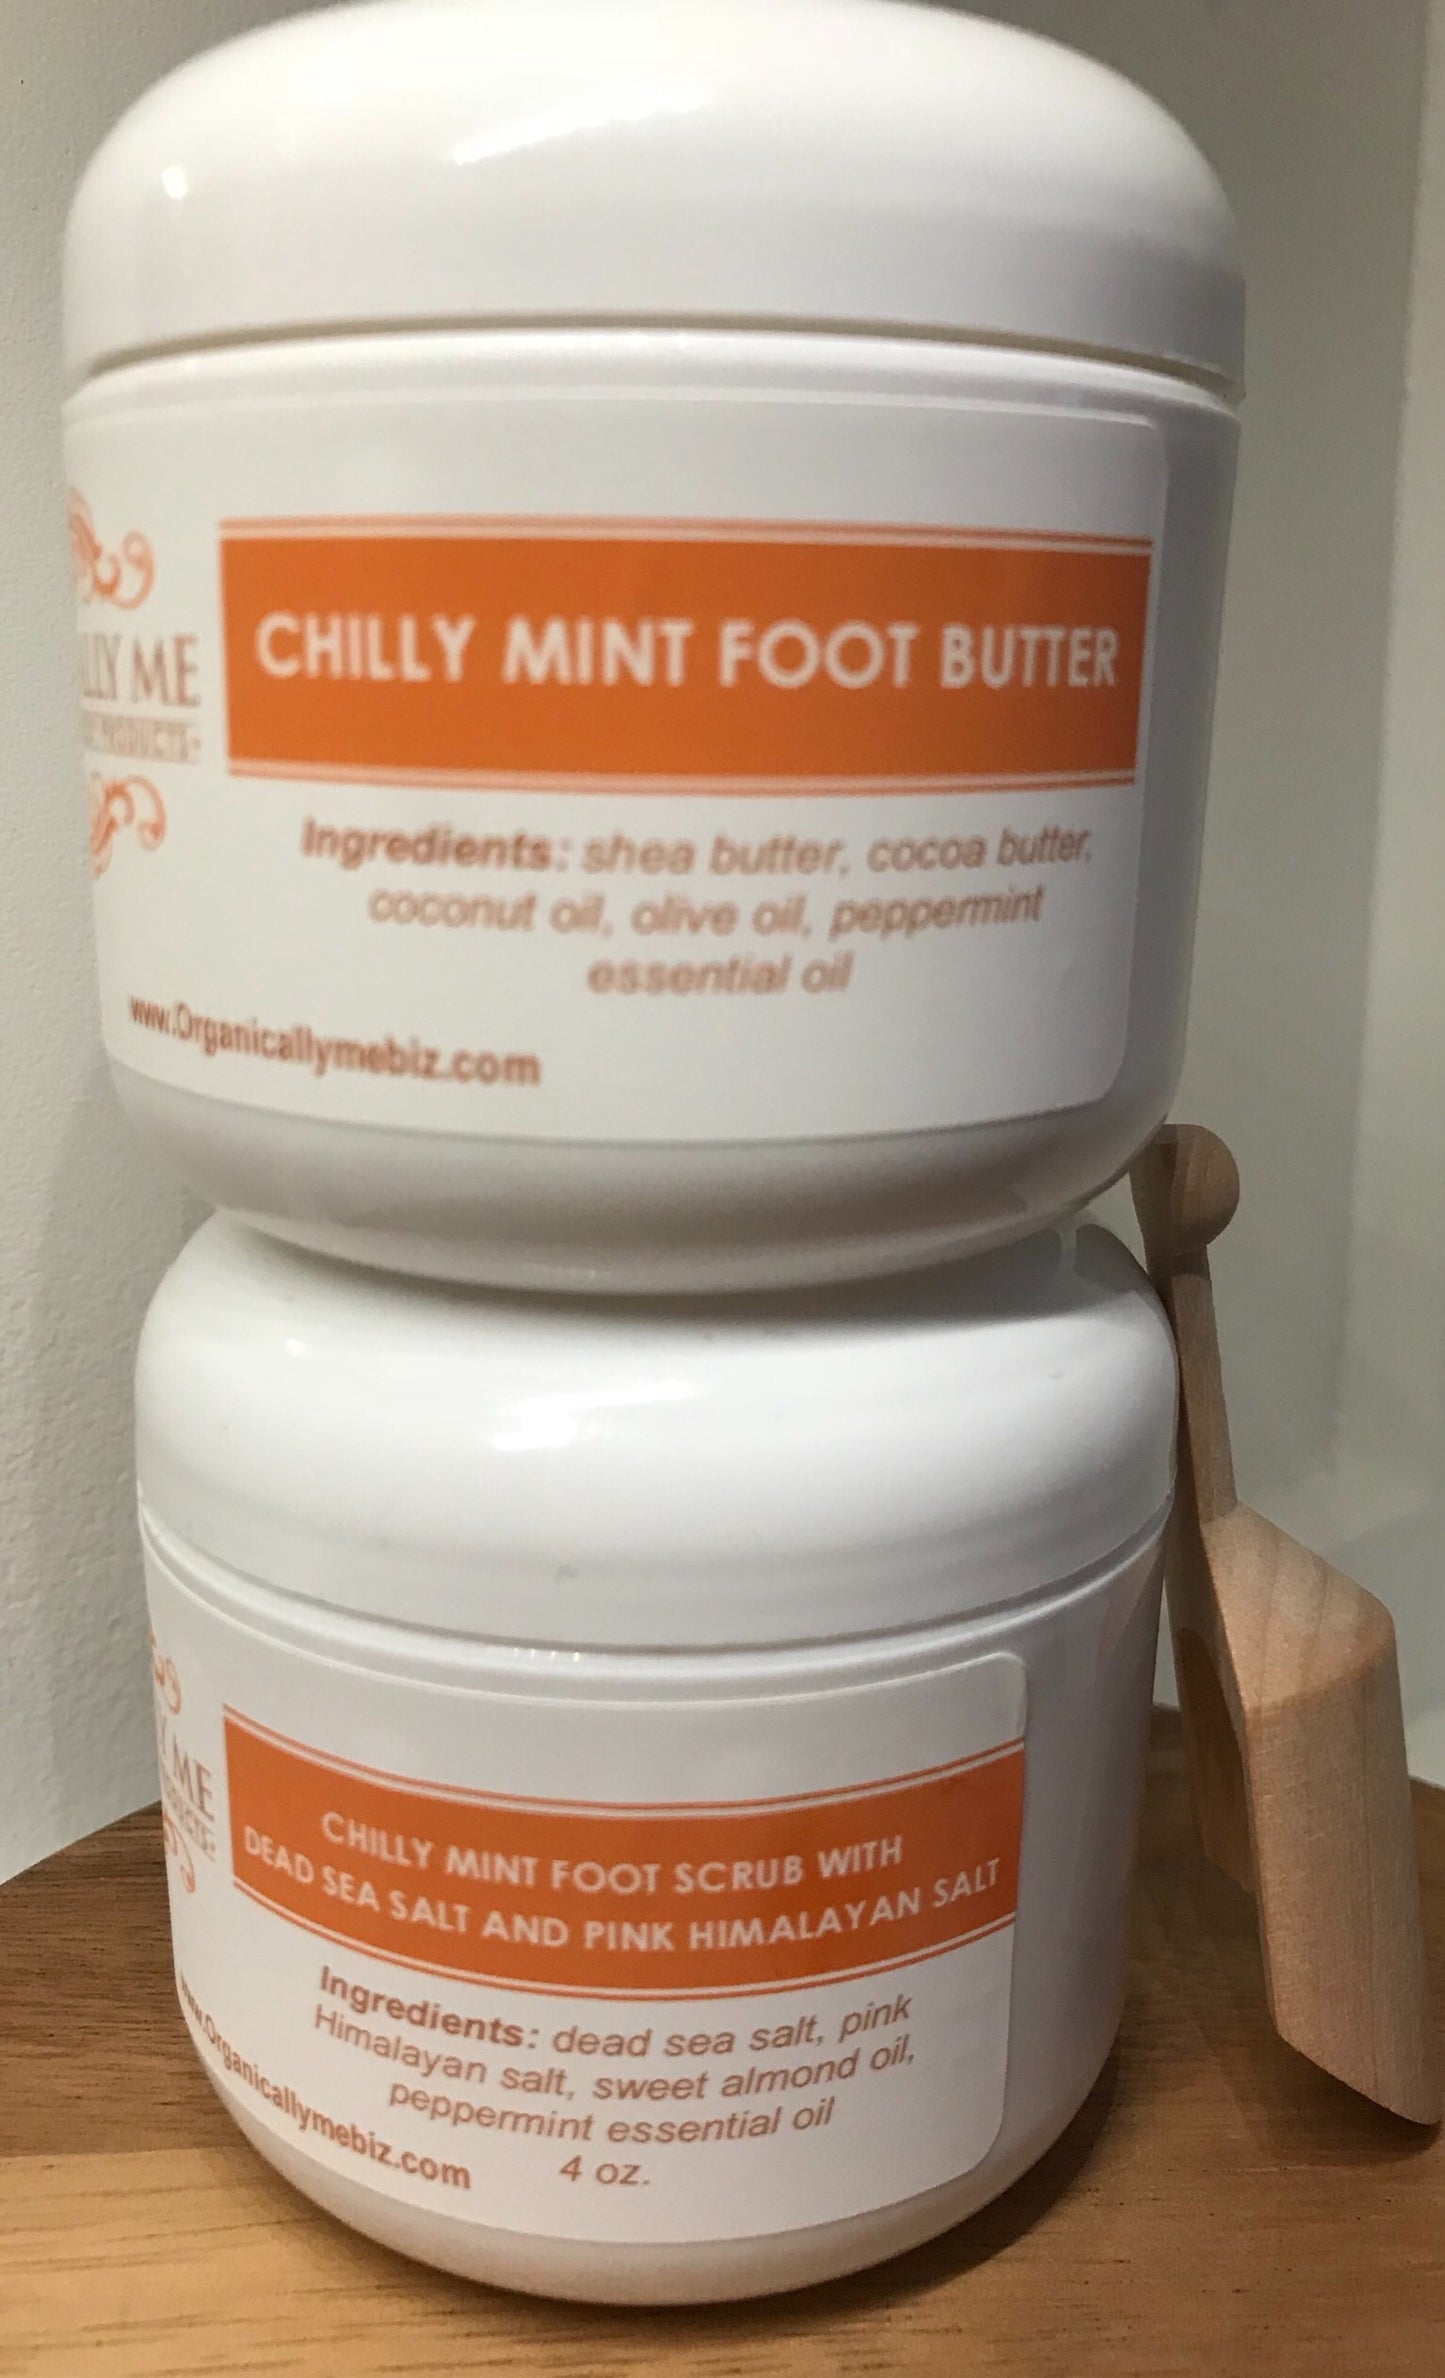 Chilly Mint Foot Gift Set